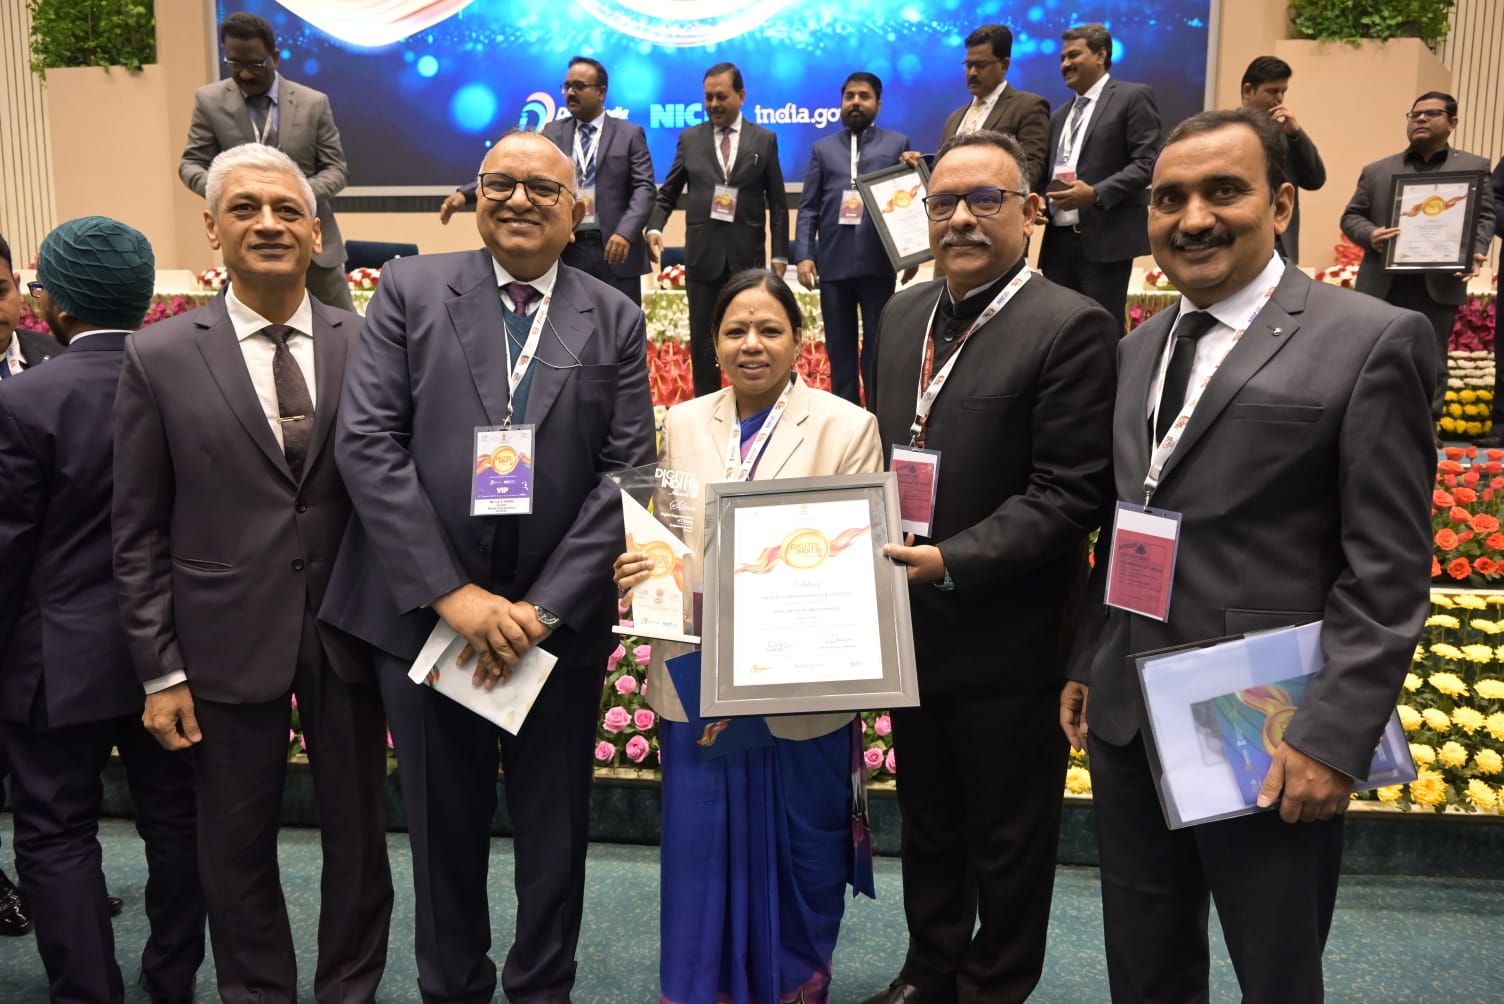 Digital India Awards 2022: Judgement Search Portal of eCourts MMP , awarded with SILVER Award